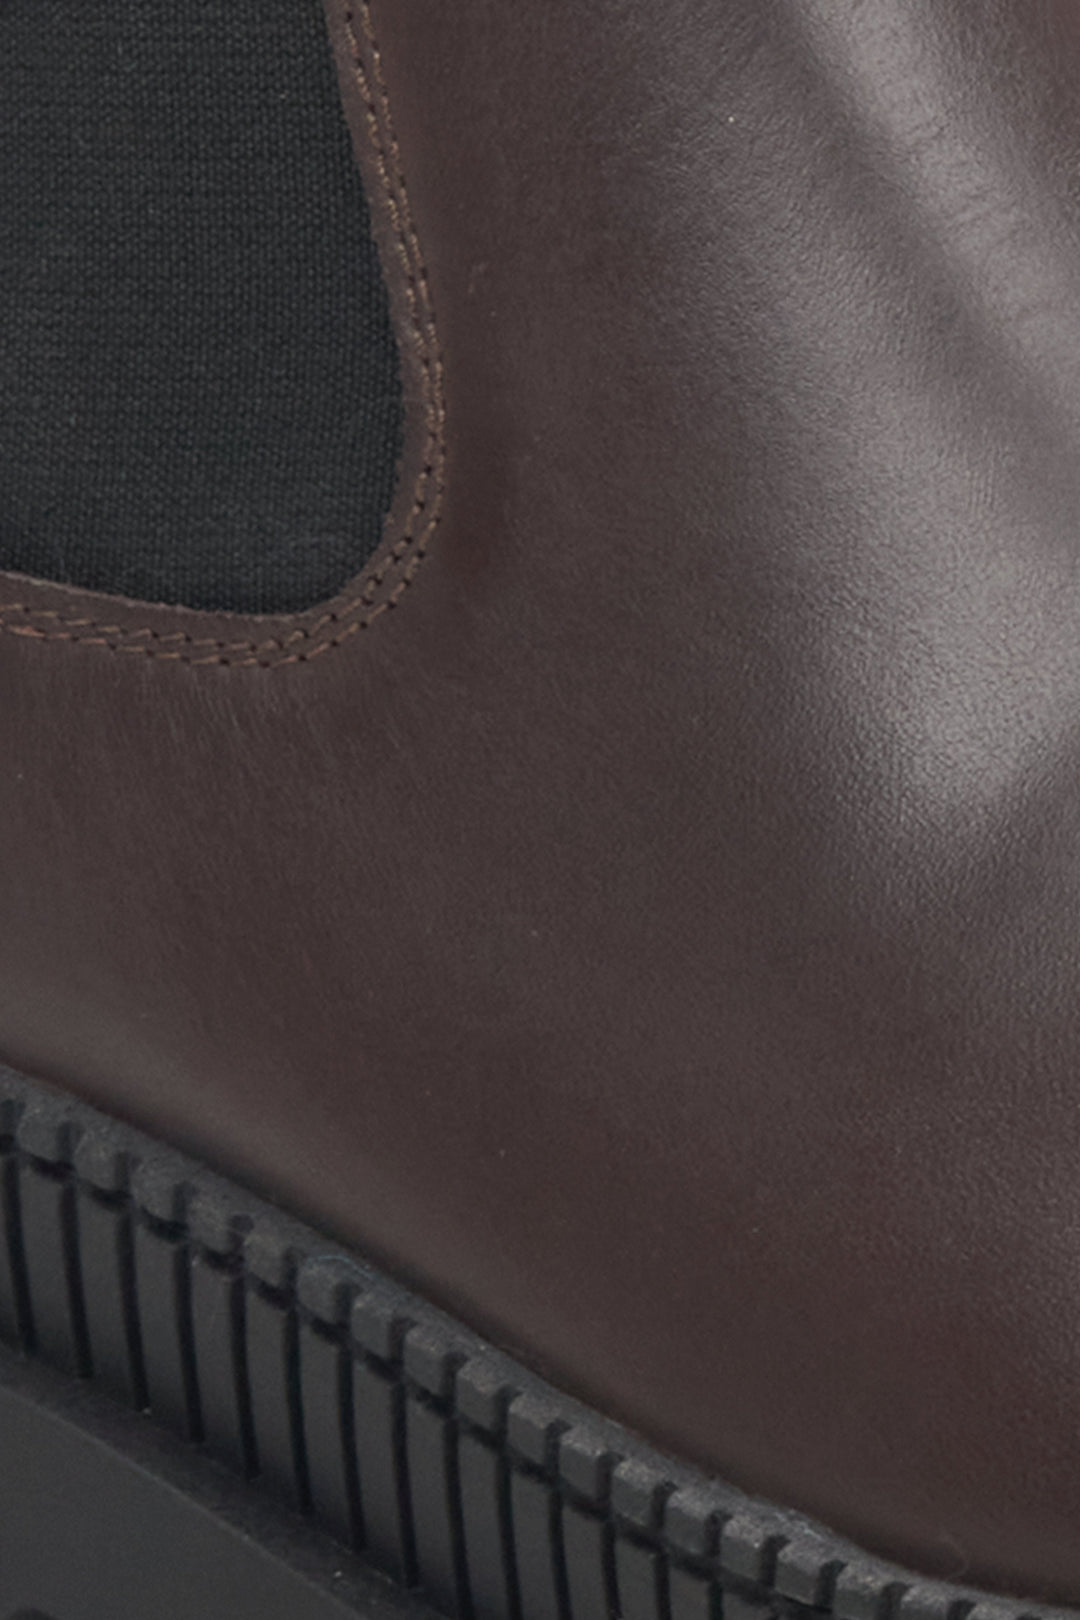 Brown-black Estro women's Chelsea boots made of genuine leather.